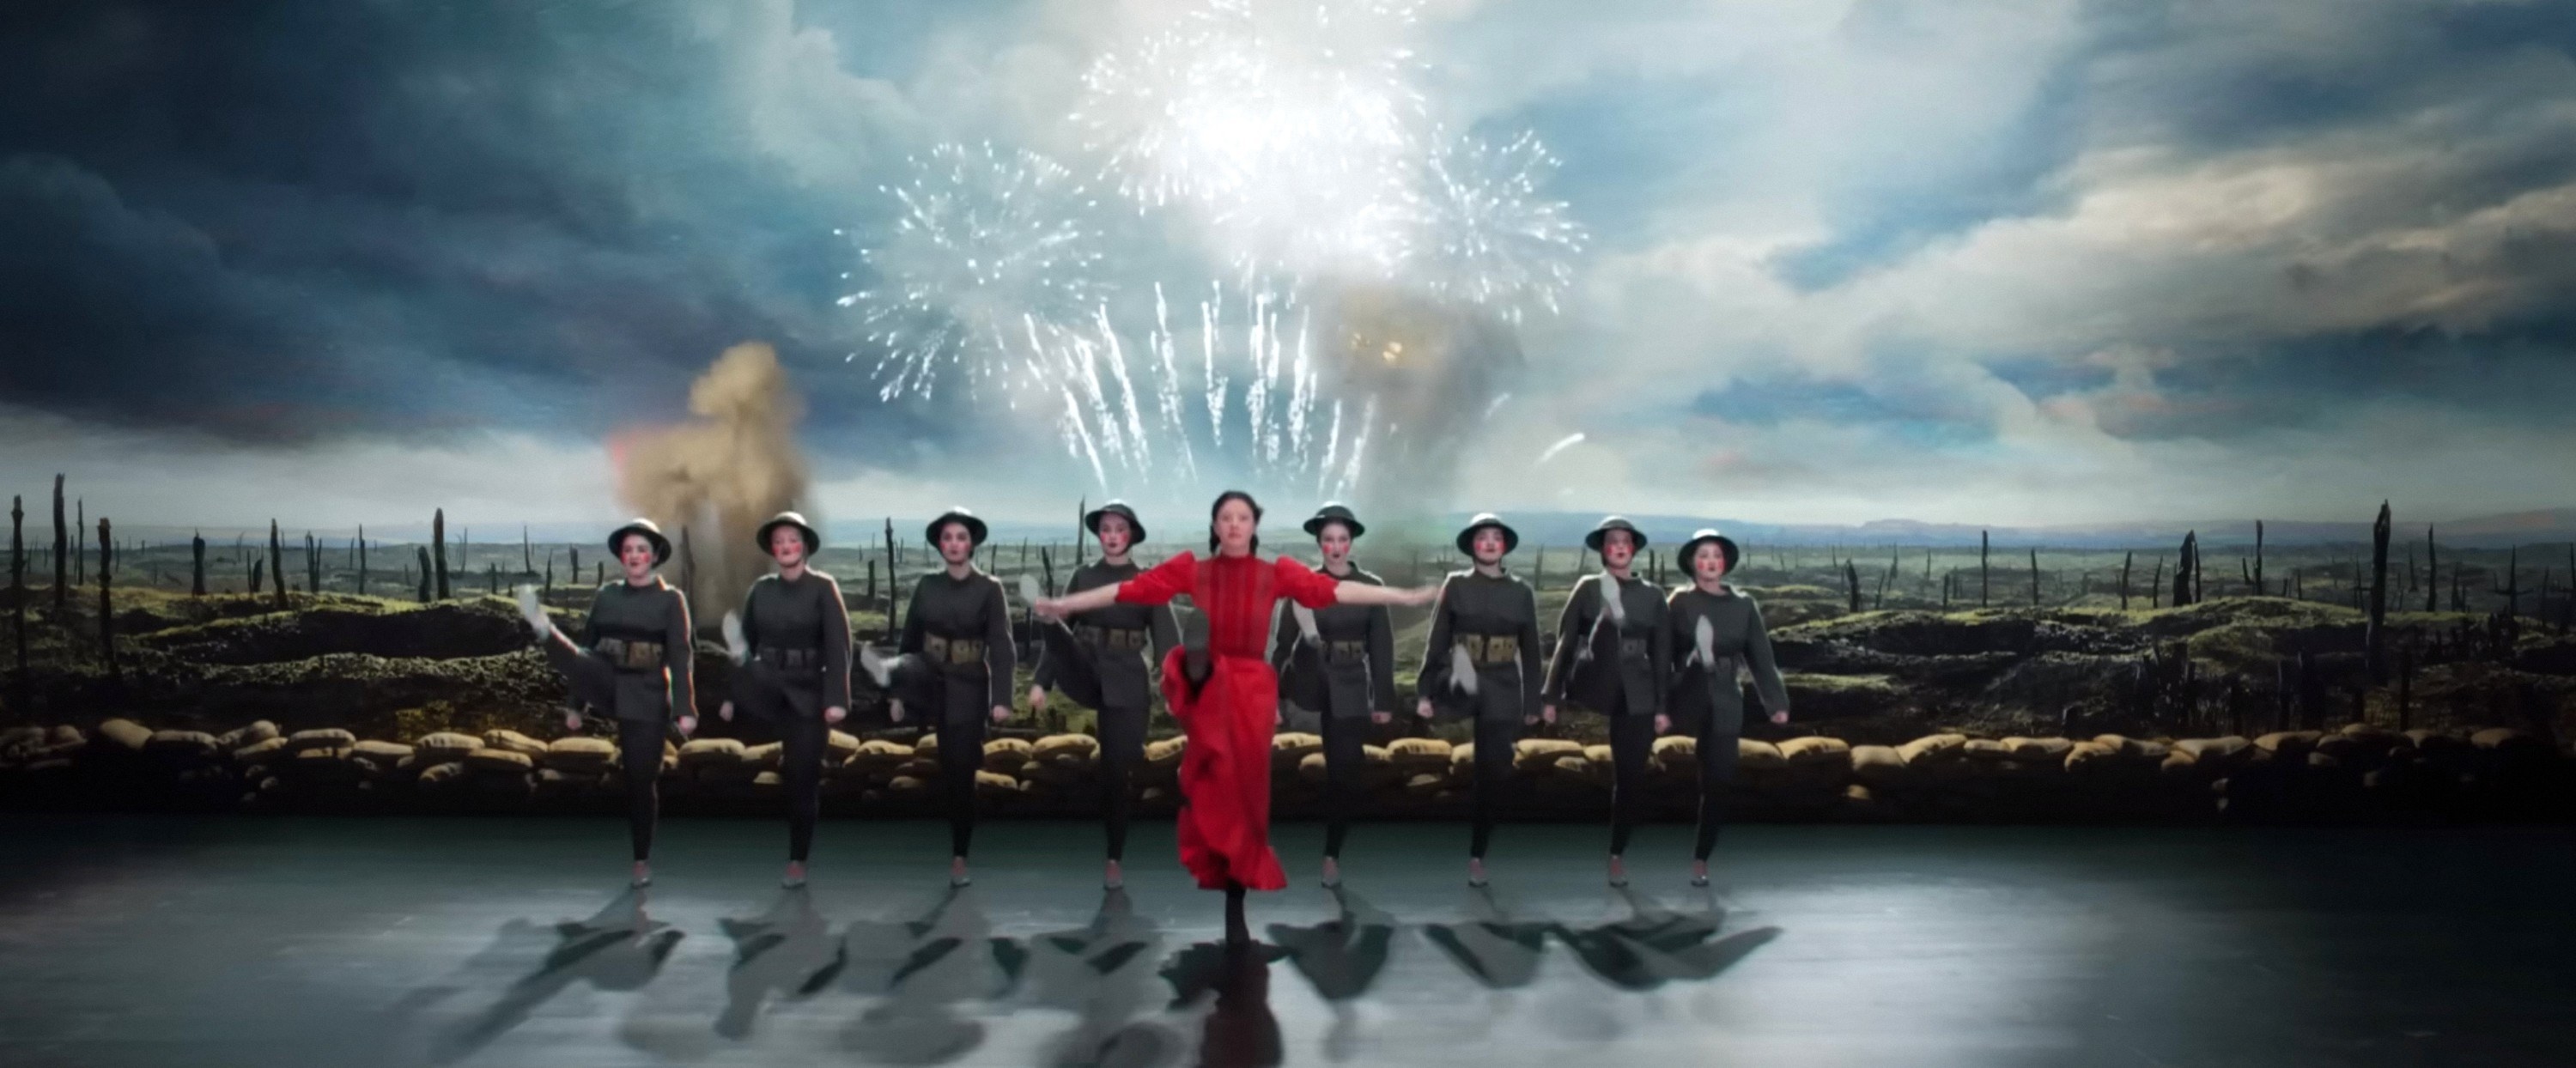 A woman in a bright red dress joins a kick line of women dressed as soldiers